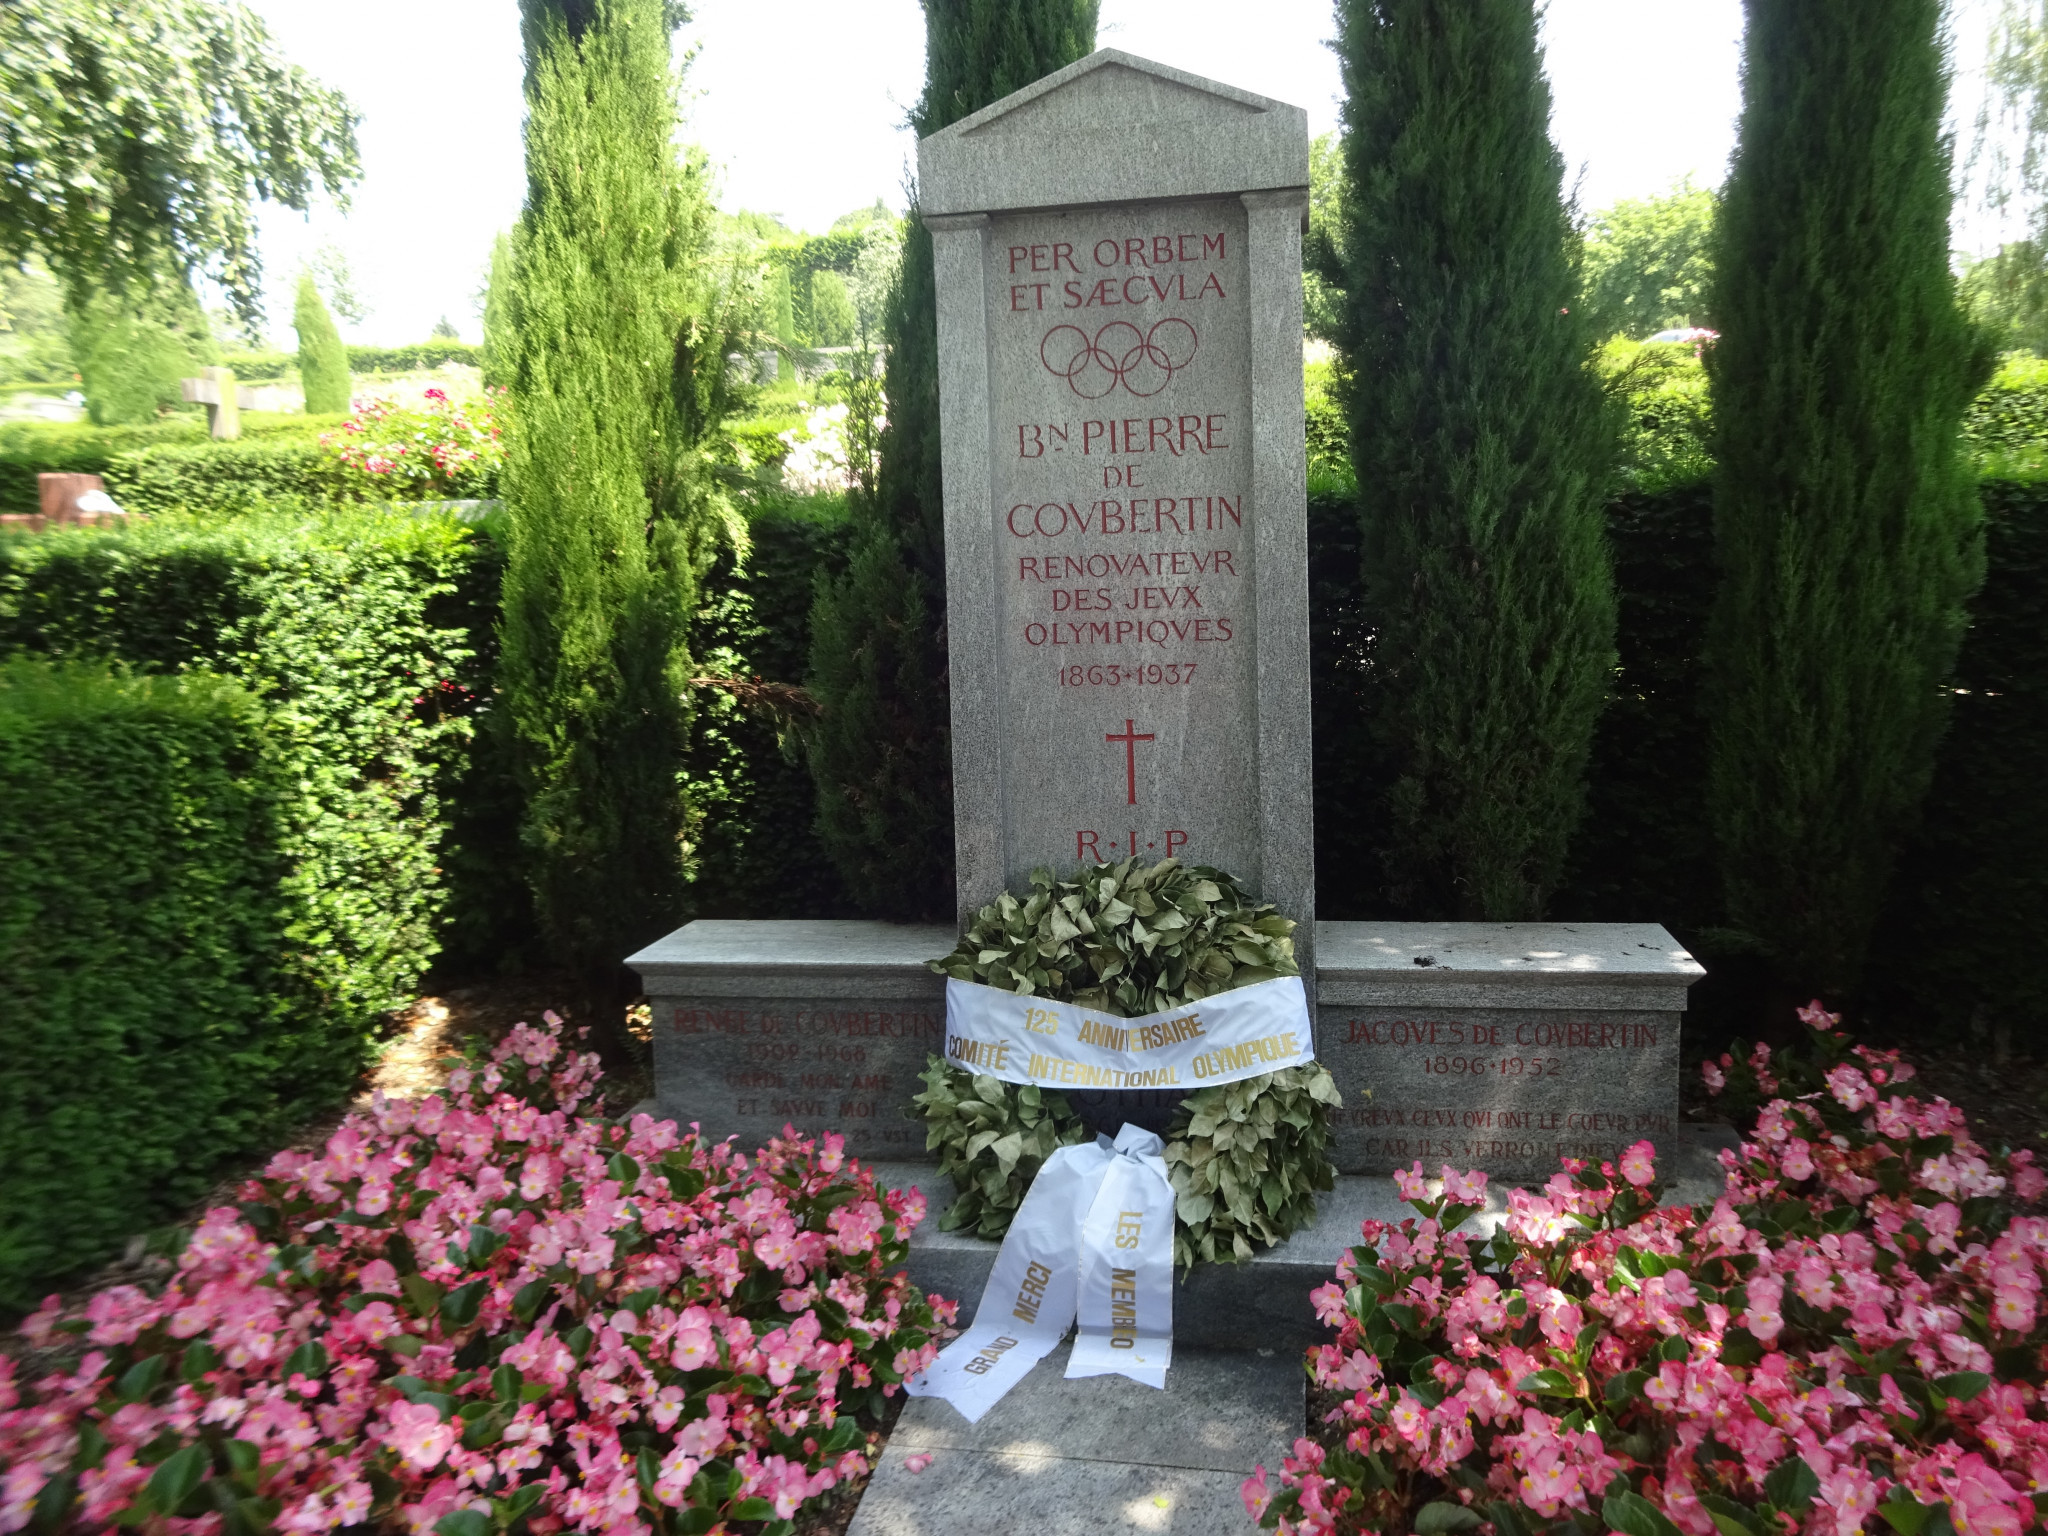 Coubertin's last resting place is in Lausanne but his heart is interred in Ancient Olympia ©ITG